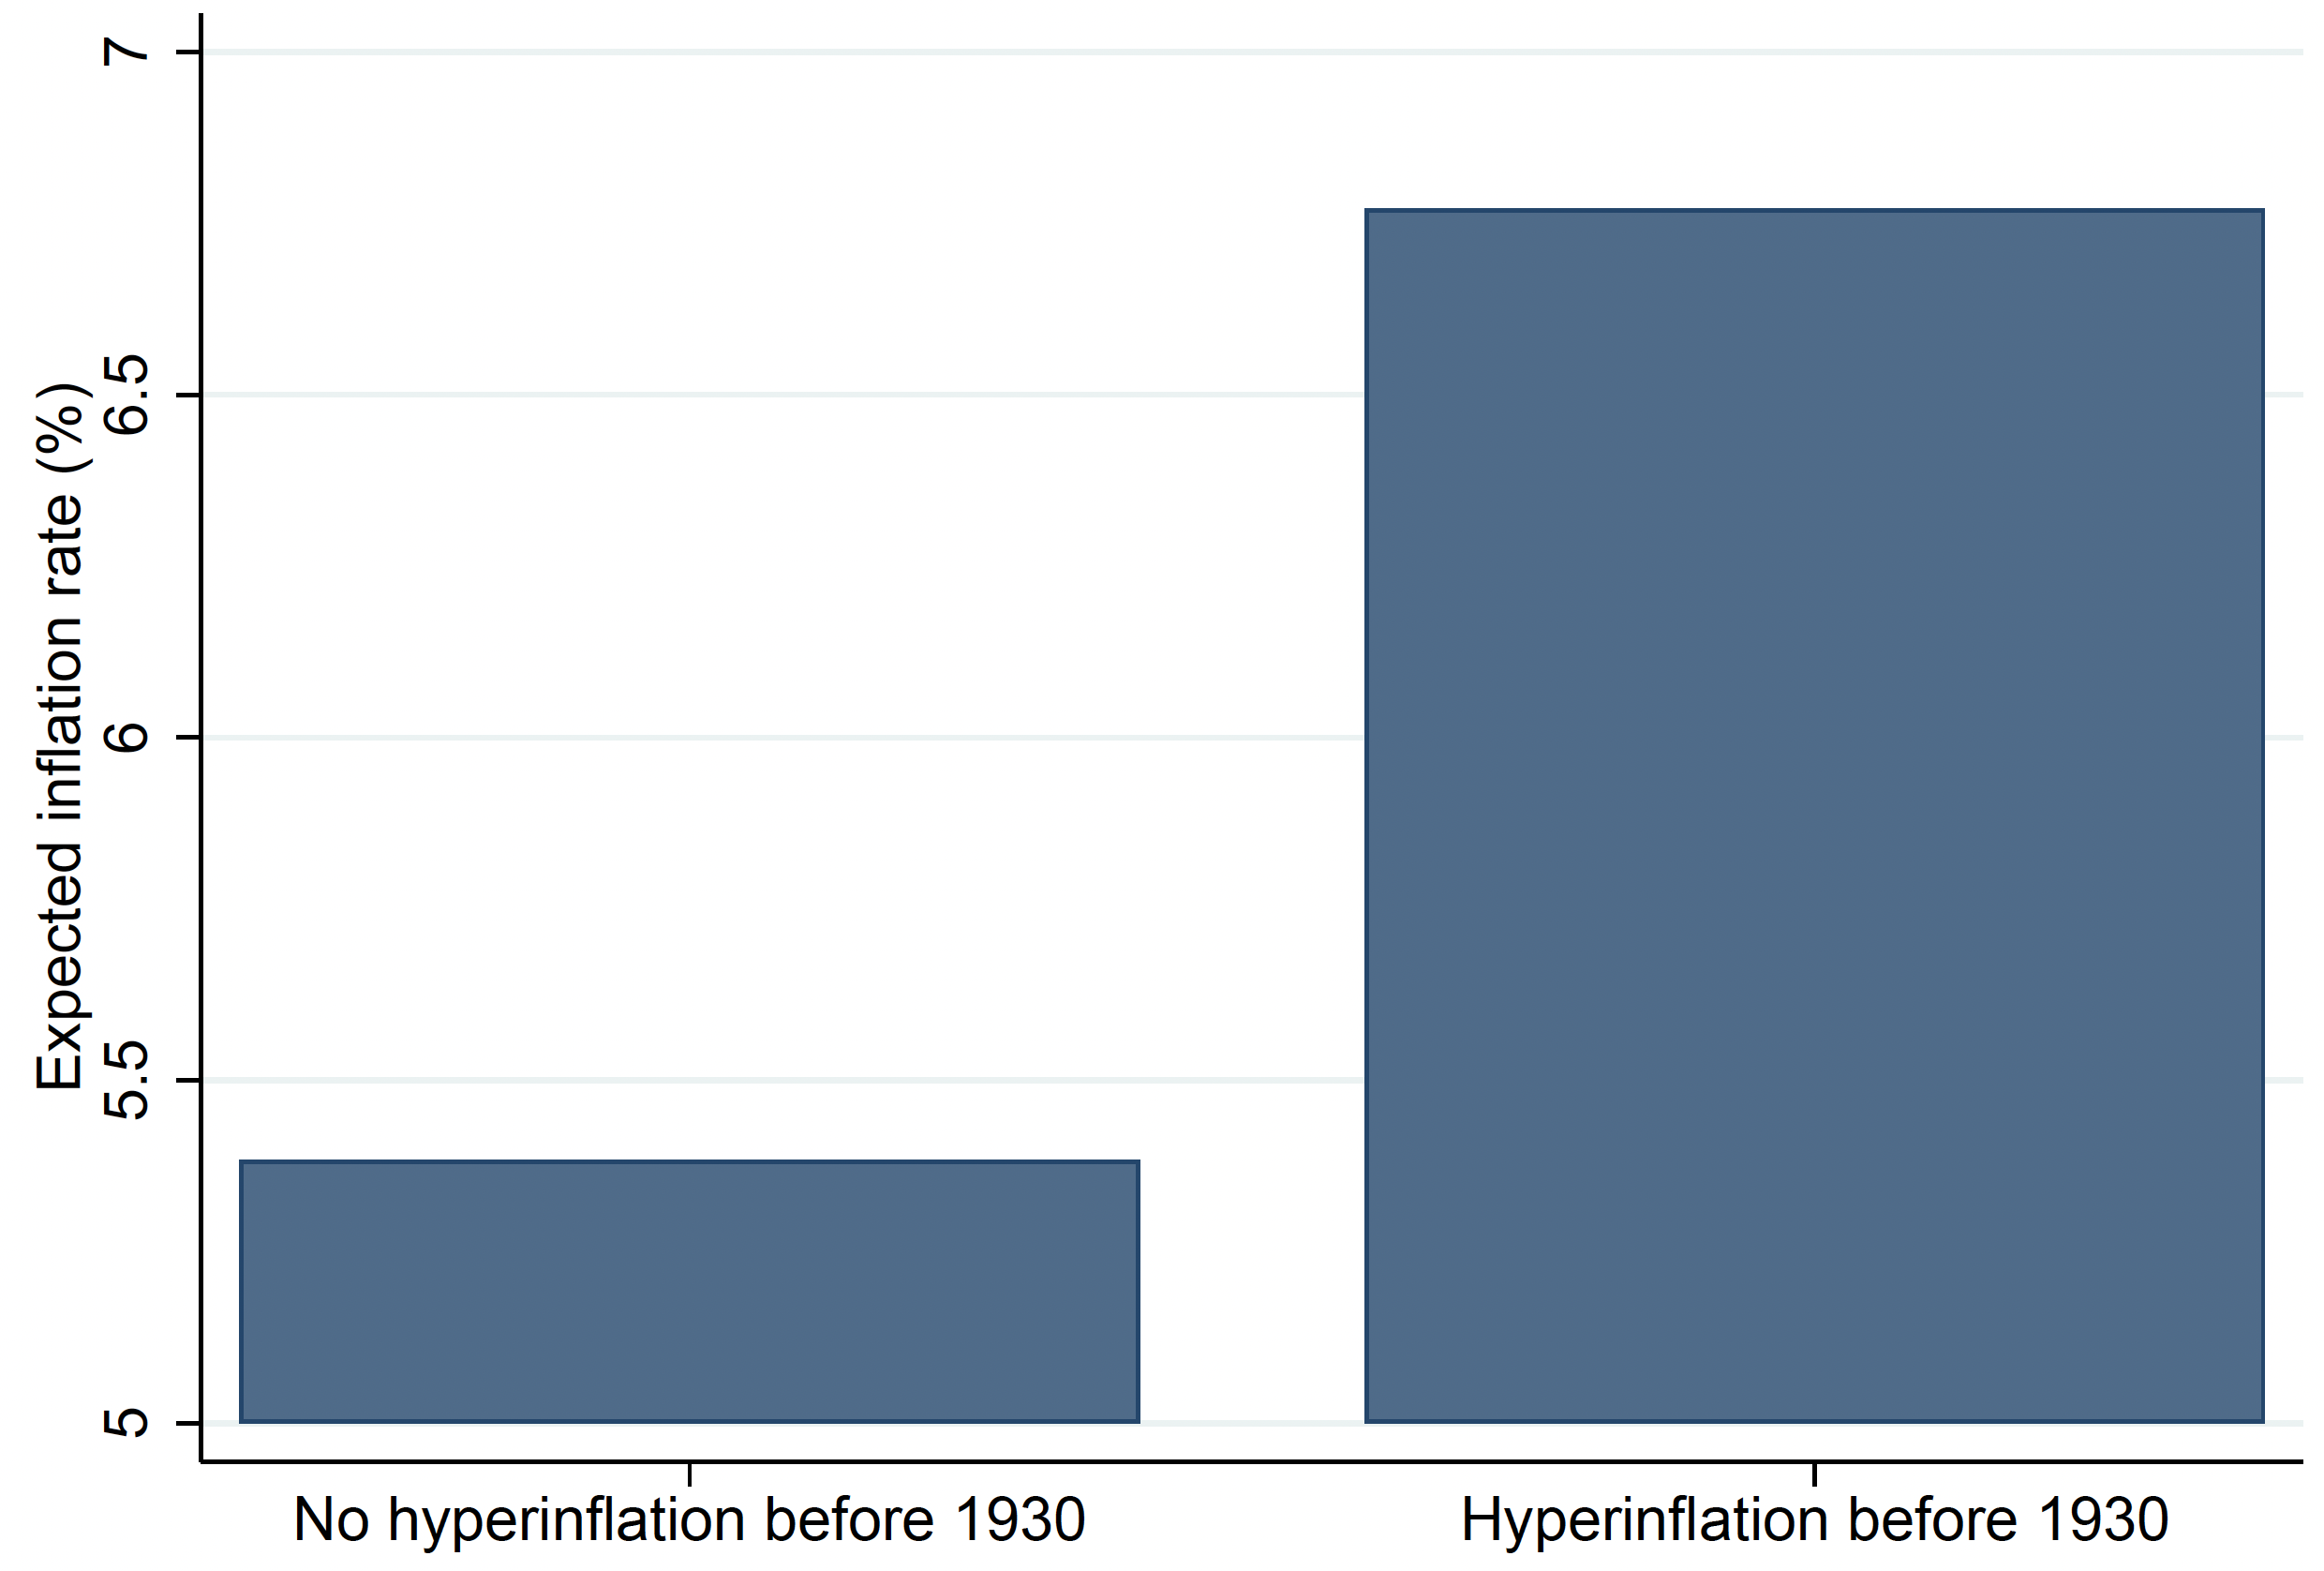 Figure 1 Past hyperinflations and today’s inflation expectations